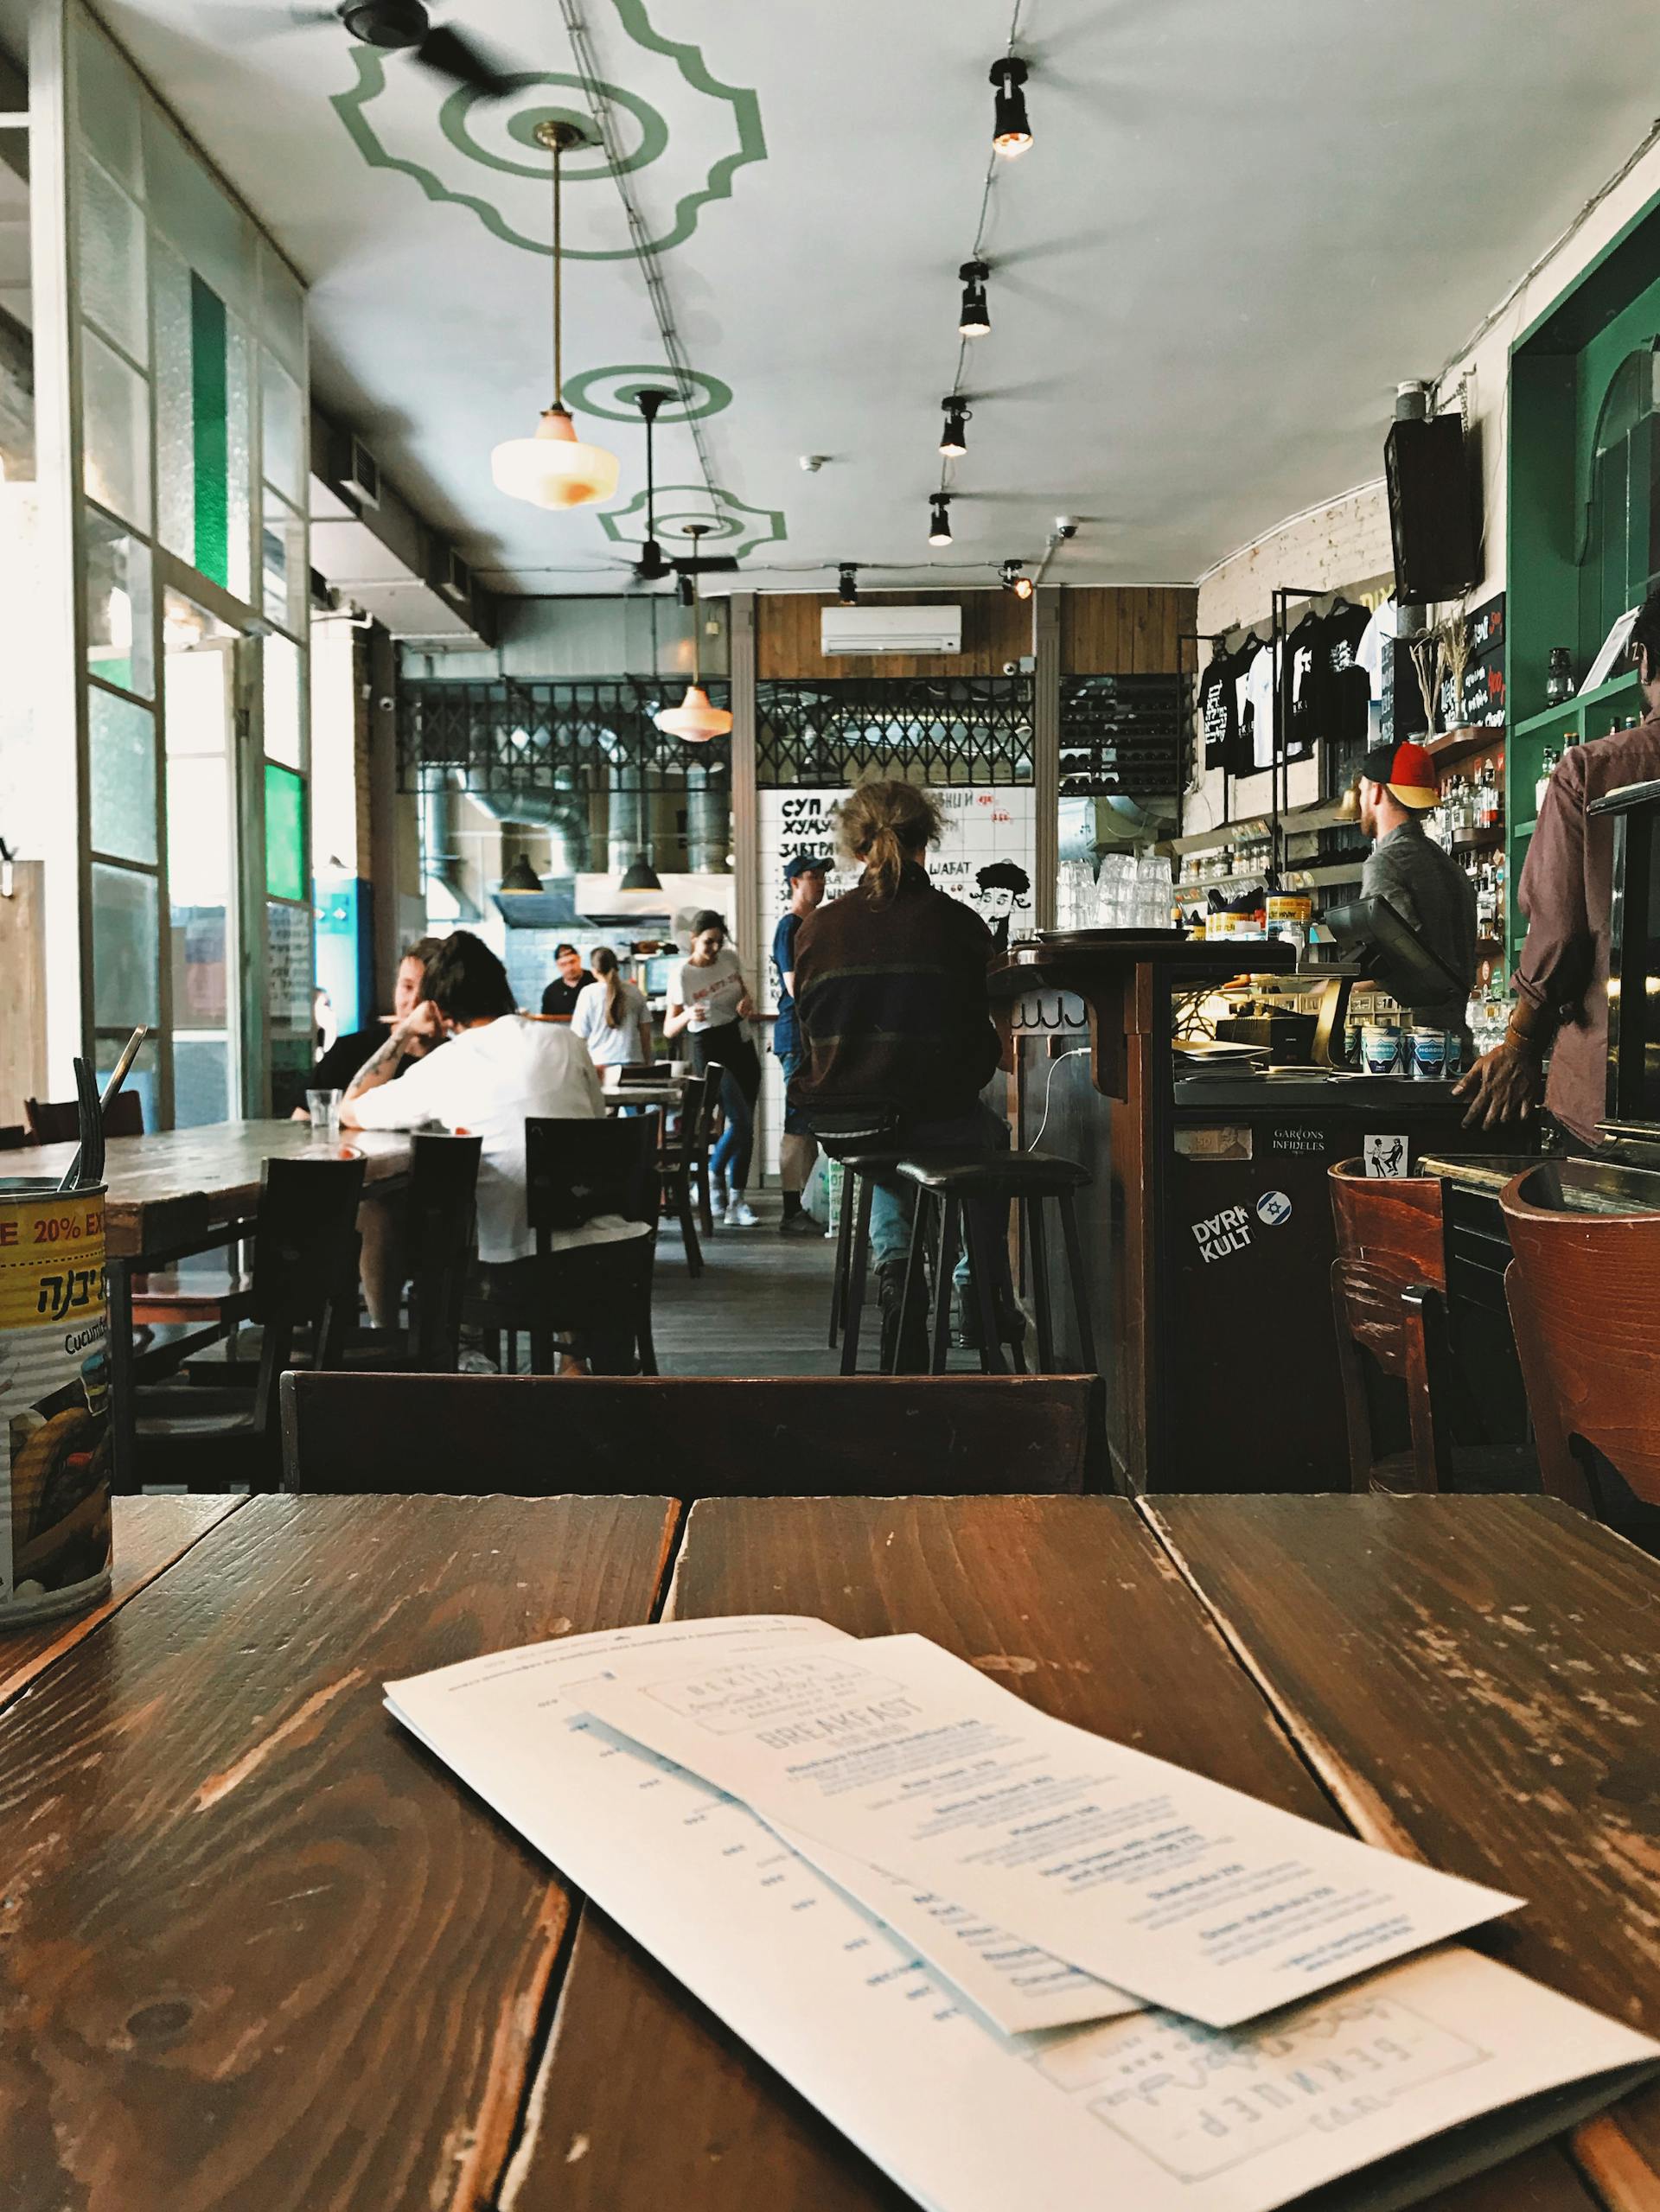 Inside a busy restaurant | Source: Pexels